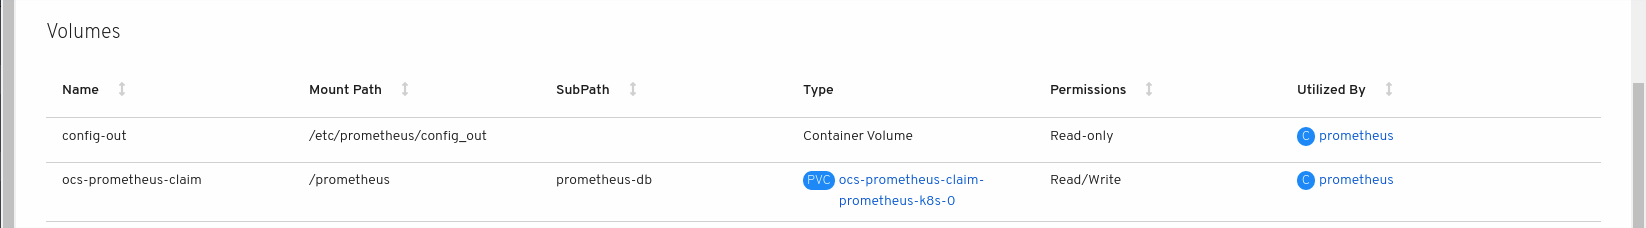 Screenshot of OpenShift Web Console showing persistent volume claim attached to the prometheus pod